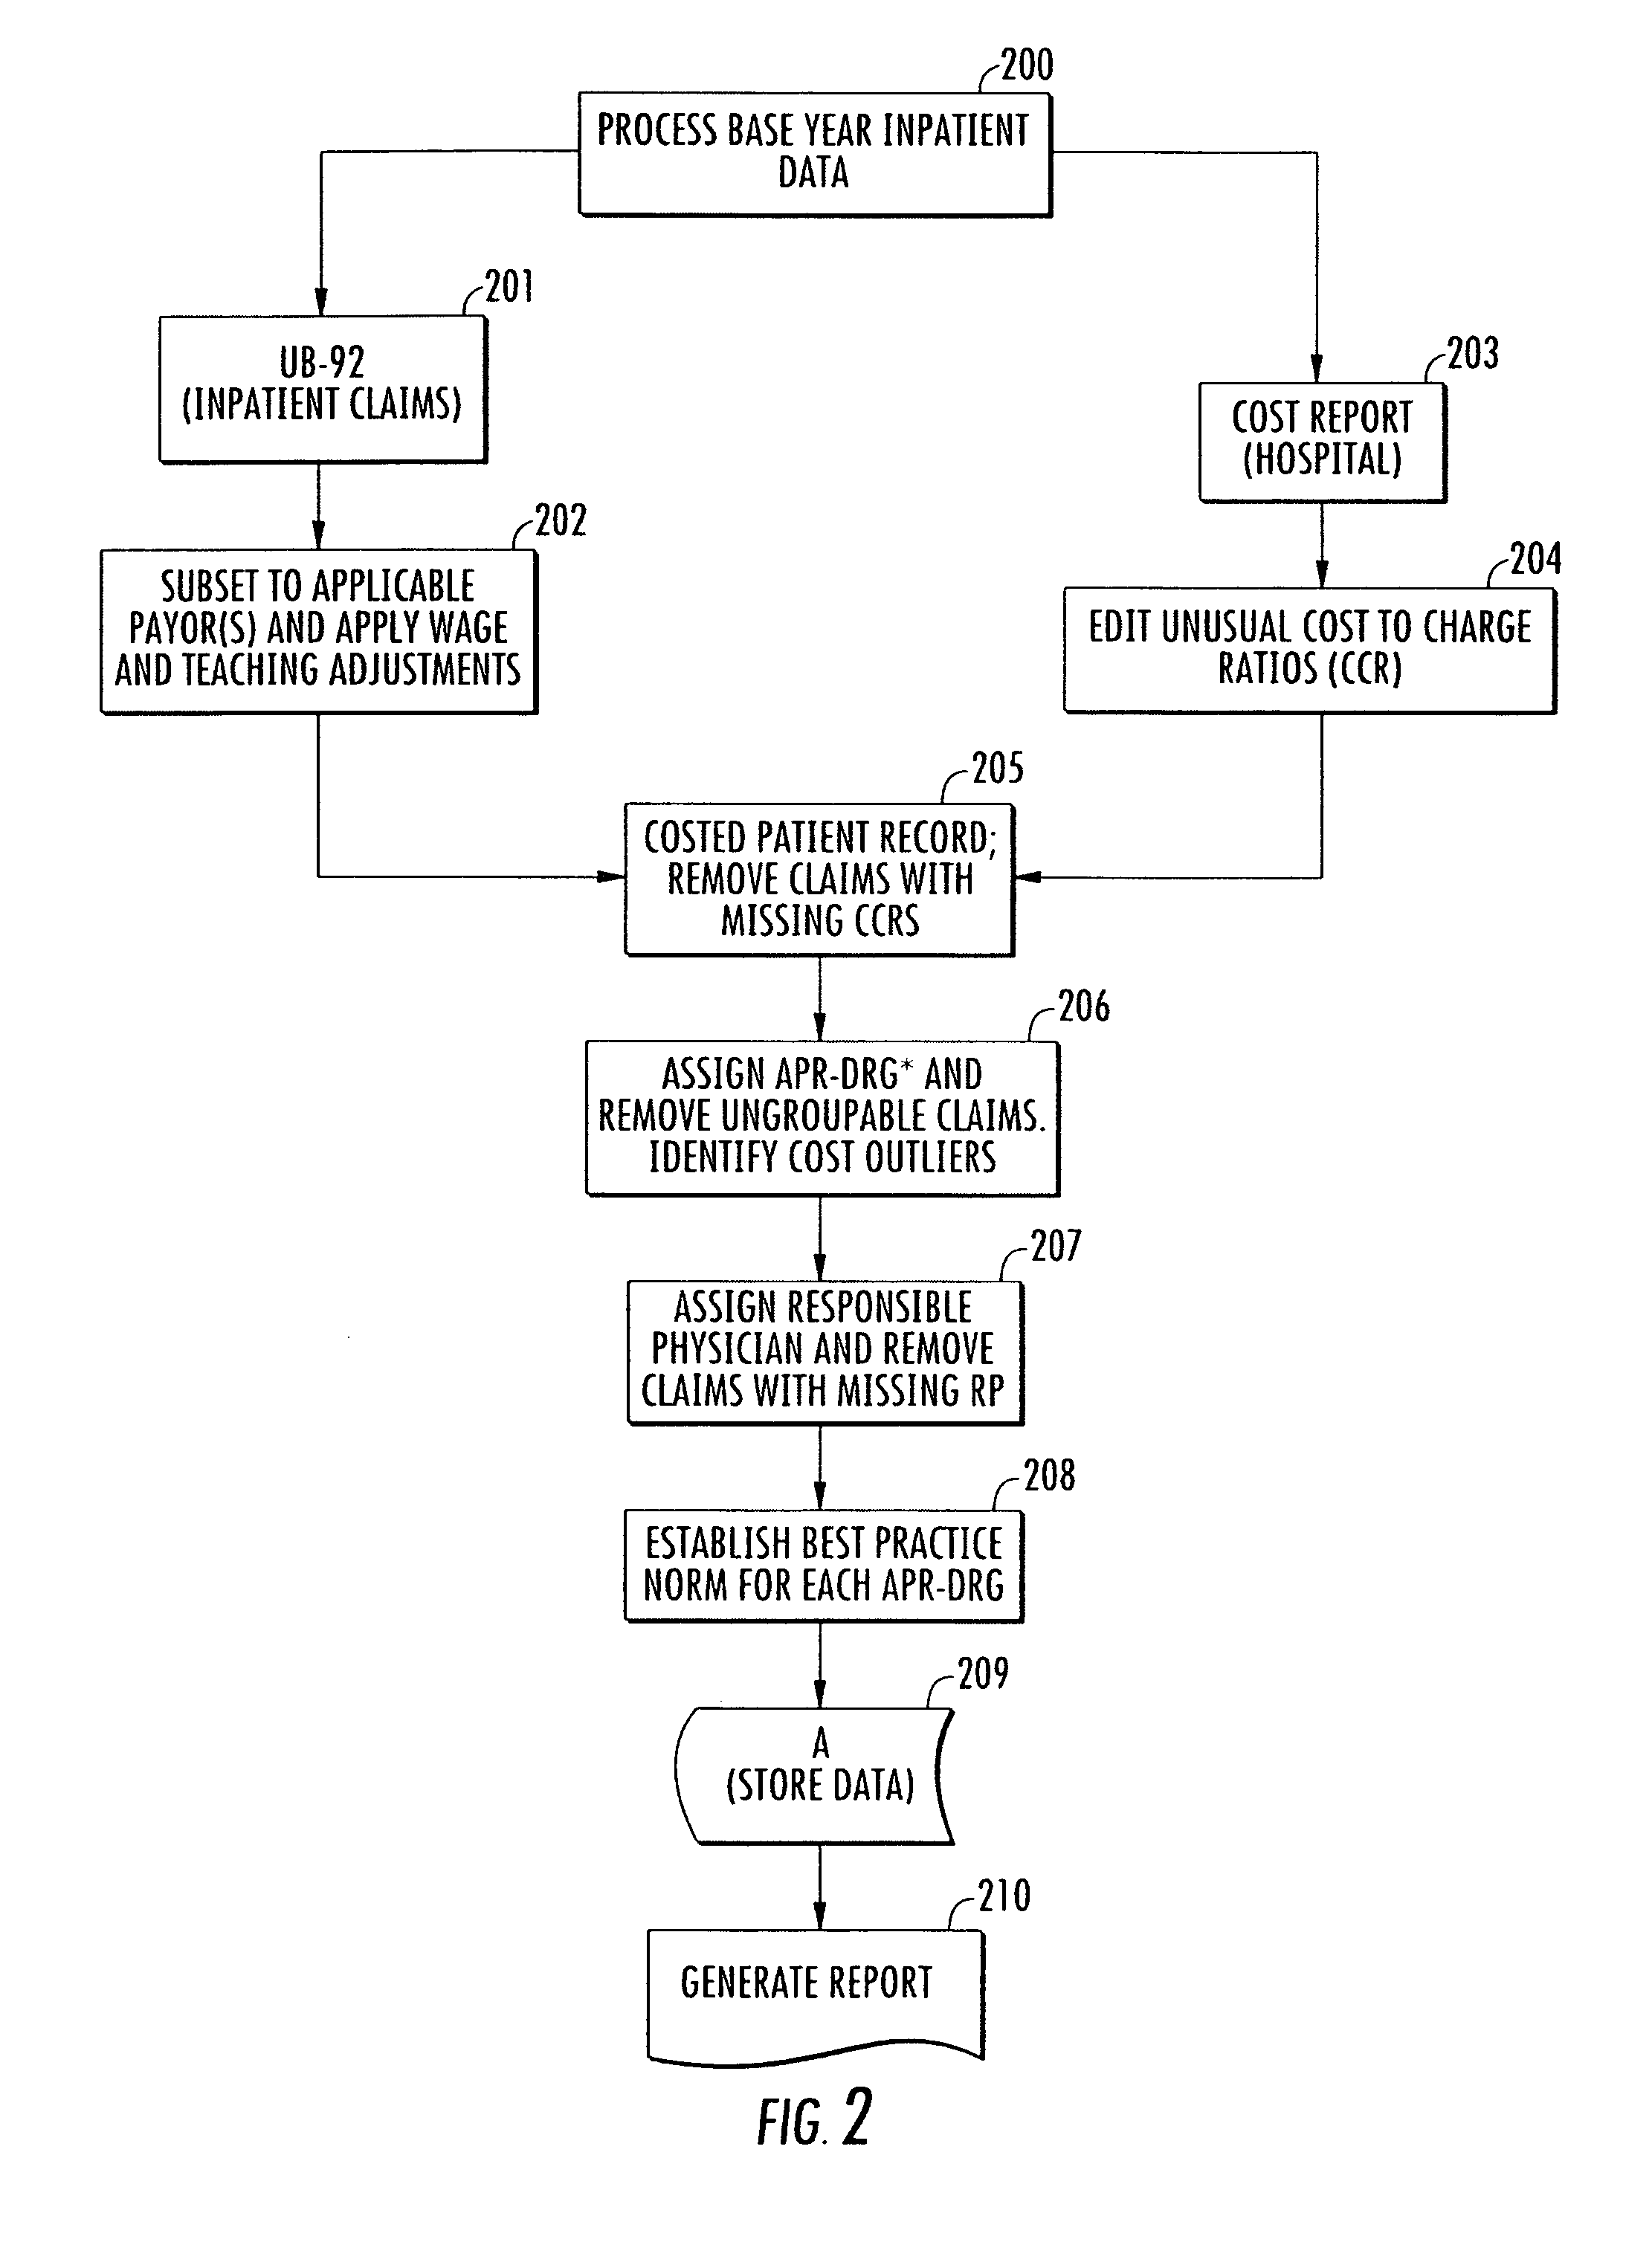 Method and system for evaluating a physician's economic performance and gainsharing of physician services